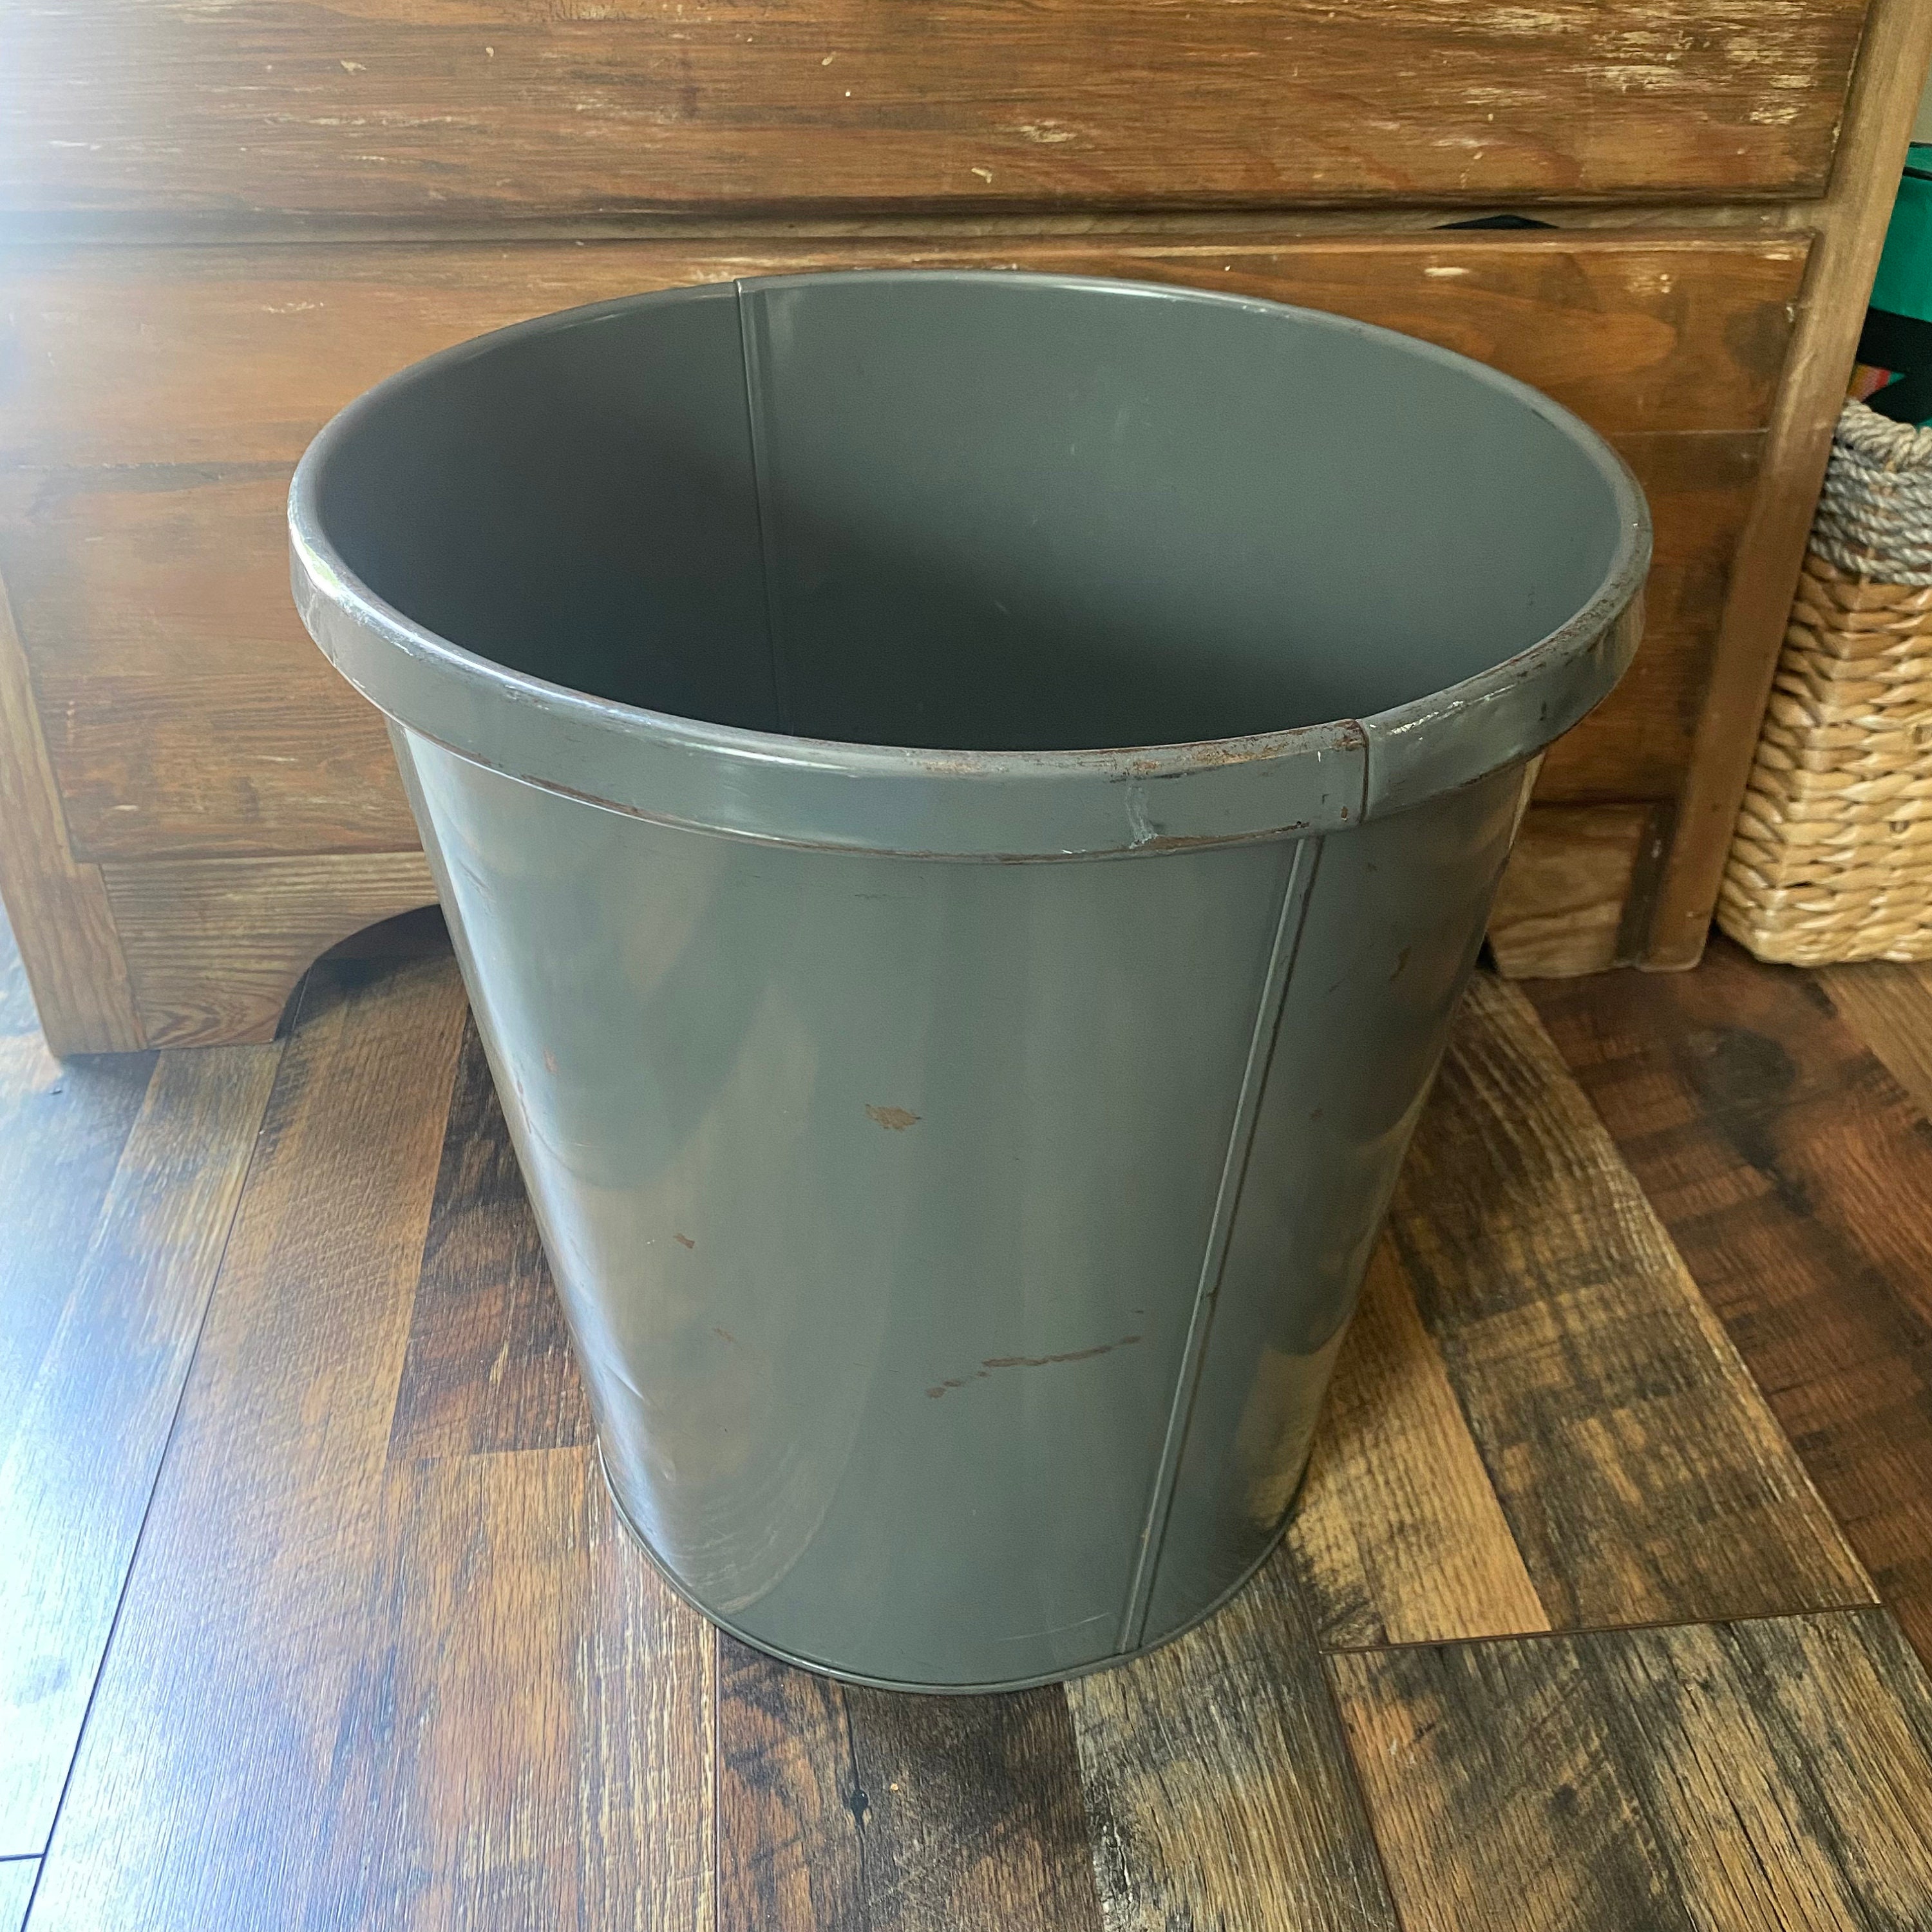 c. 1950's original pressed american industrial vintage steel roberts  electric company office stationary trash can or paper waste basket with  original baked on gray enameled finish